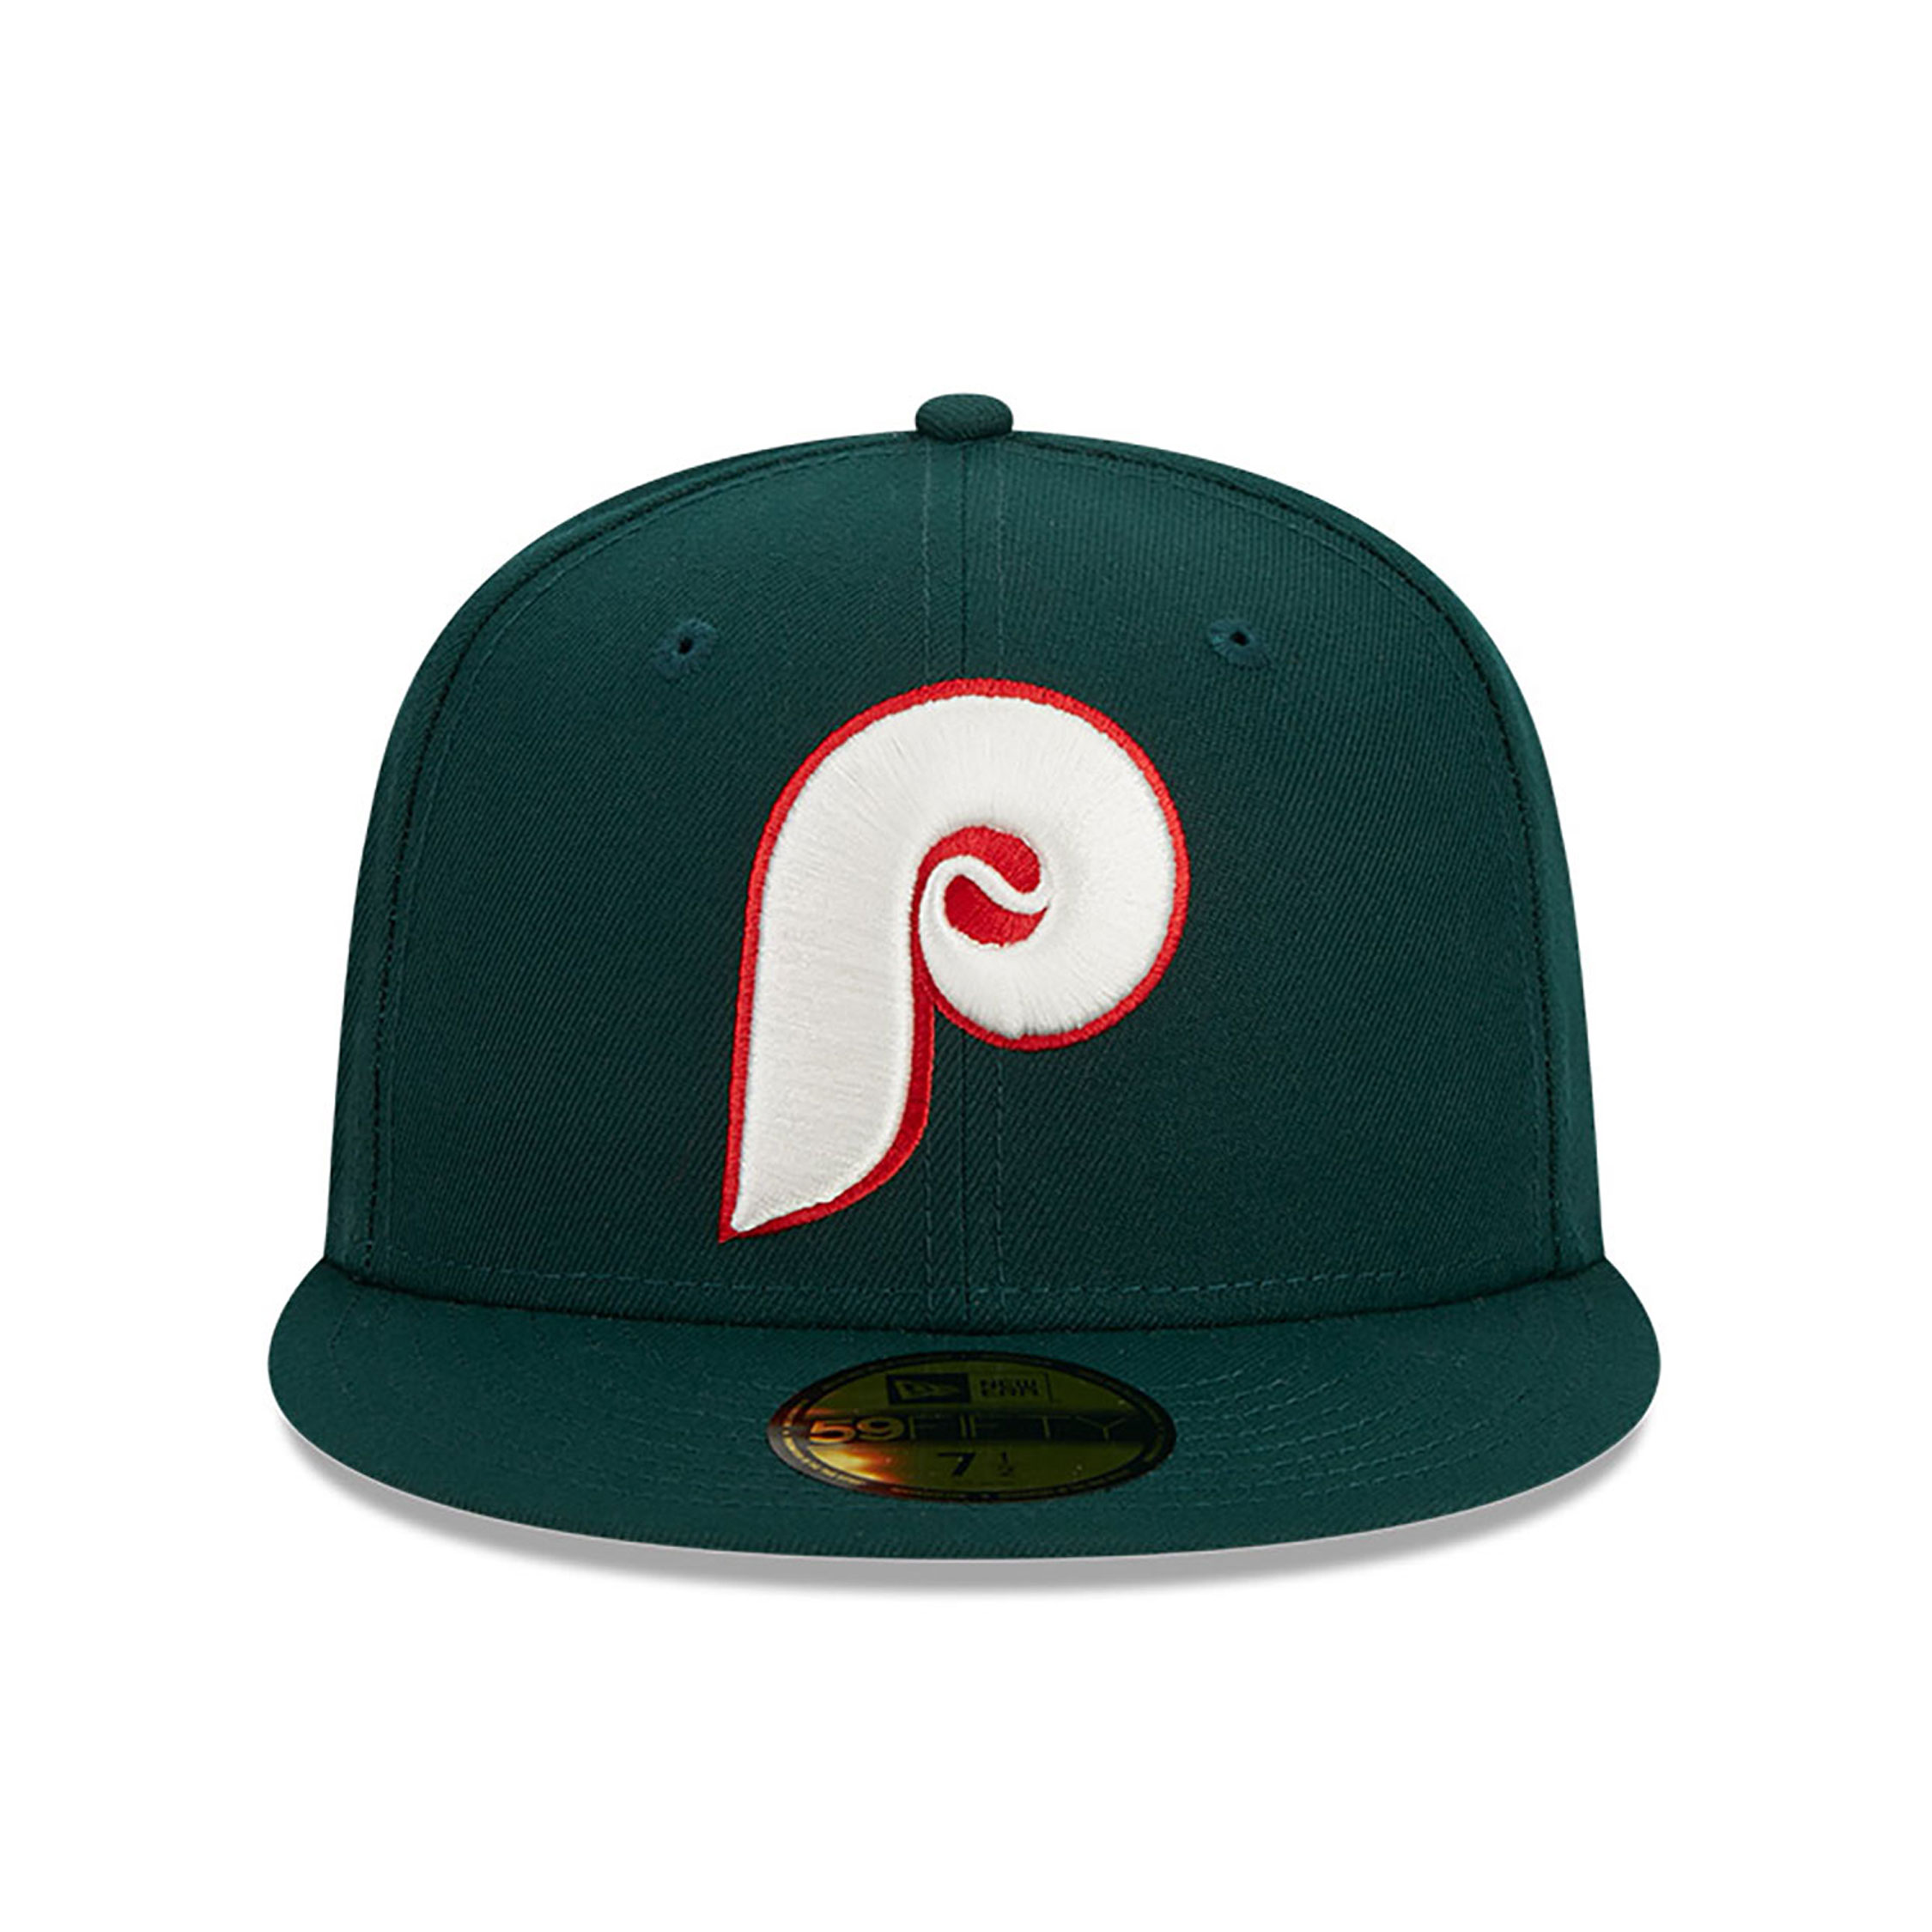 Philadelphia Phillies Spice Berry Dark Green 59FIFTY Fitted Cap